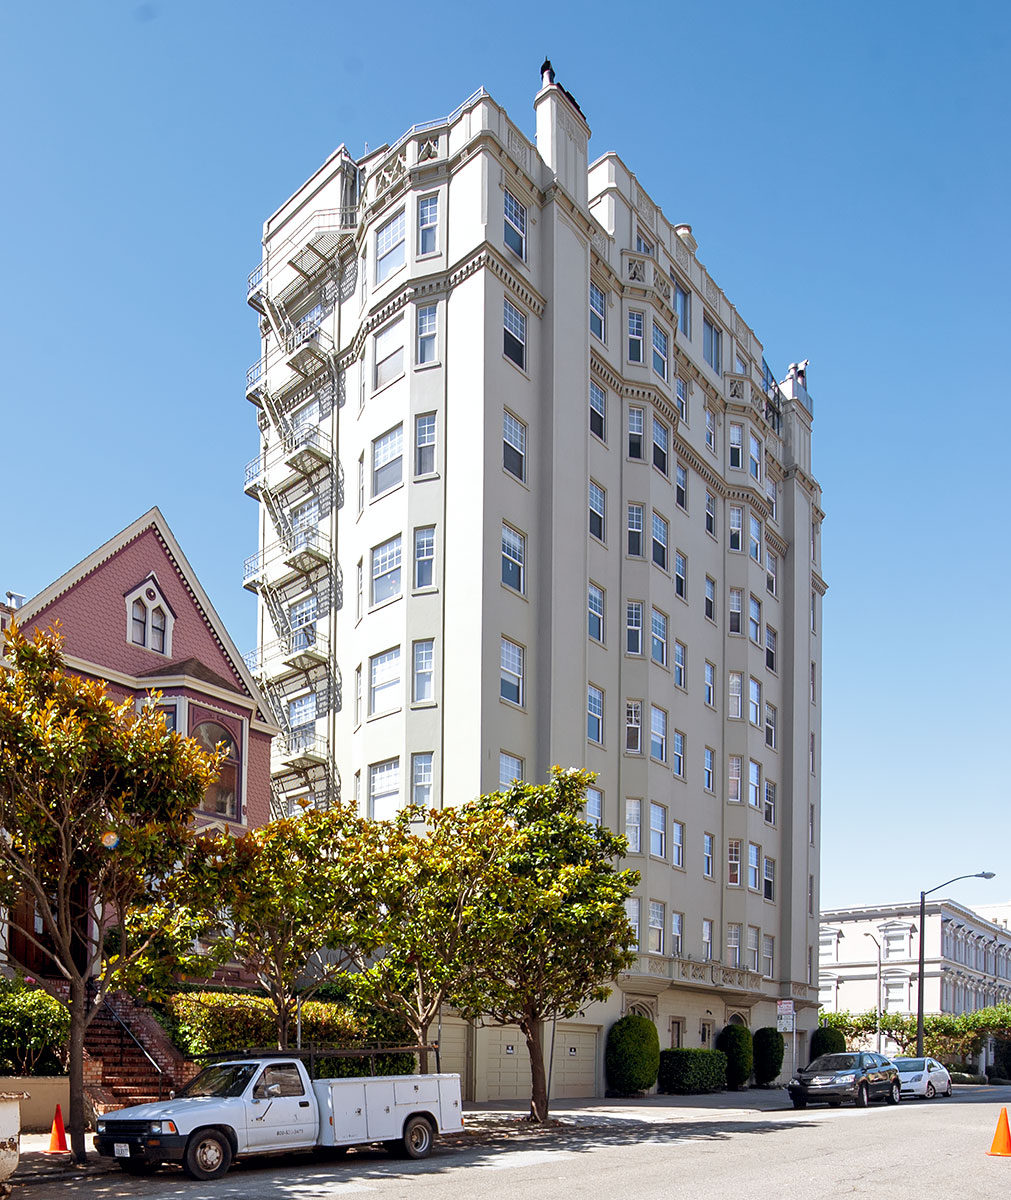 2299 Pacific Avenue in Pacific Heights, designed by Conrad Meussdorffer, built 1928